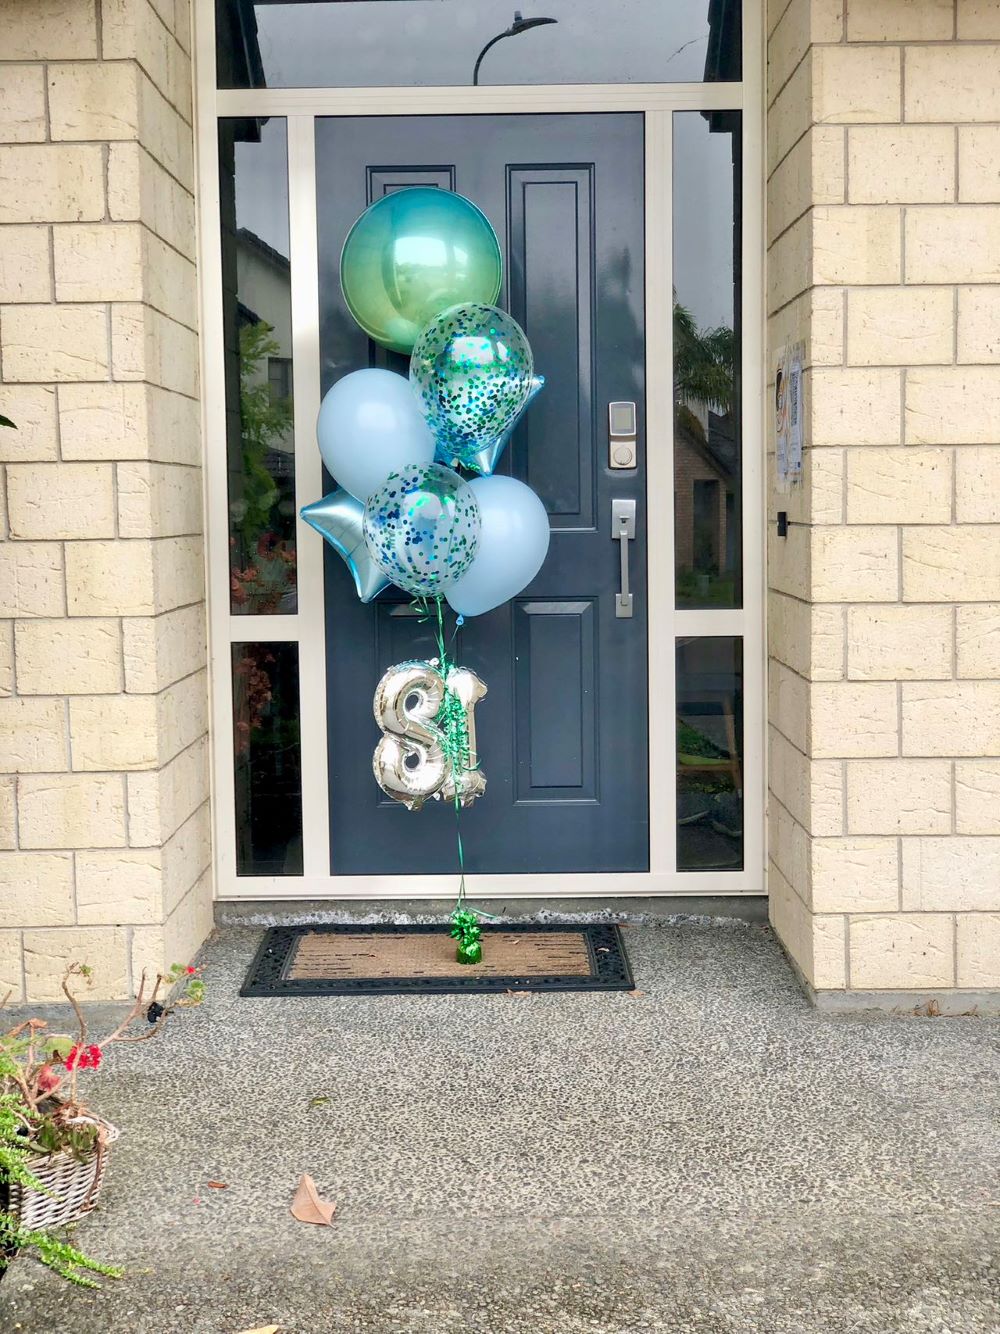 My Party Box Blue and Green Deluxe Balloon Bouquet with Orbz balloons, starts balloons, satin blue balloons and blue confetti balloons at front door